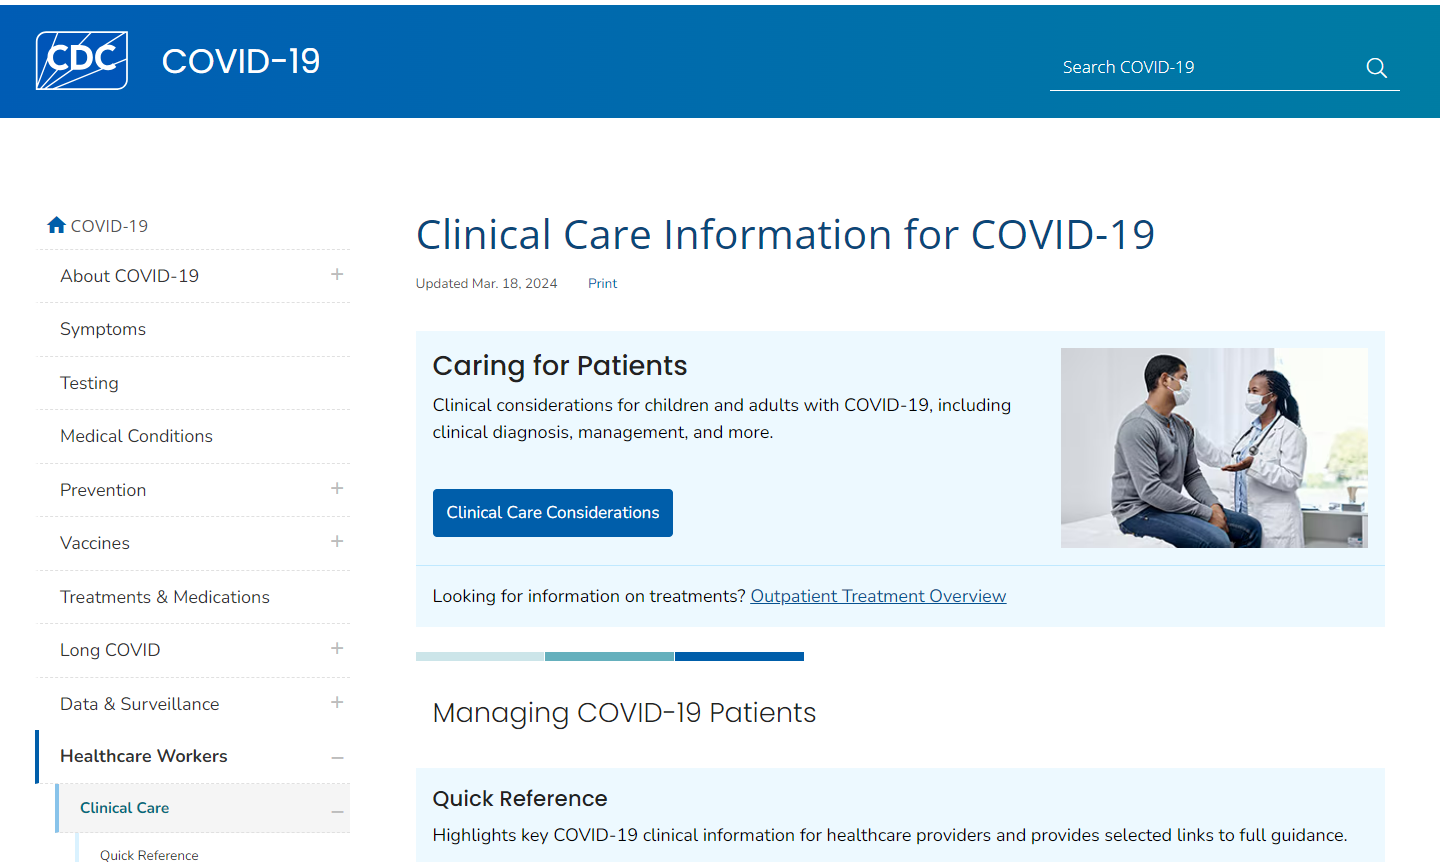 Website by the CDC, with its logo in the top left corner, describing clinical care considerations for COVID-19.